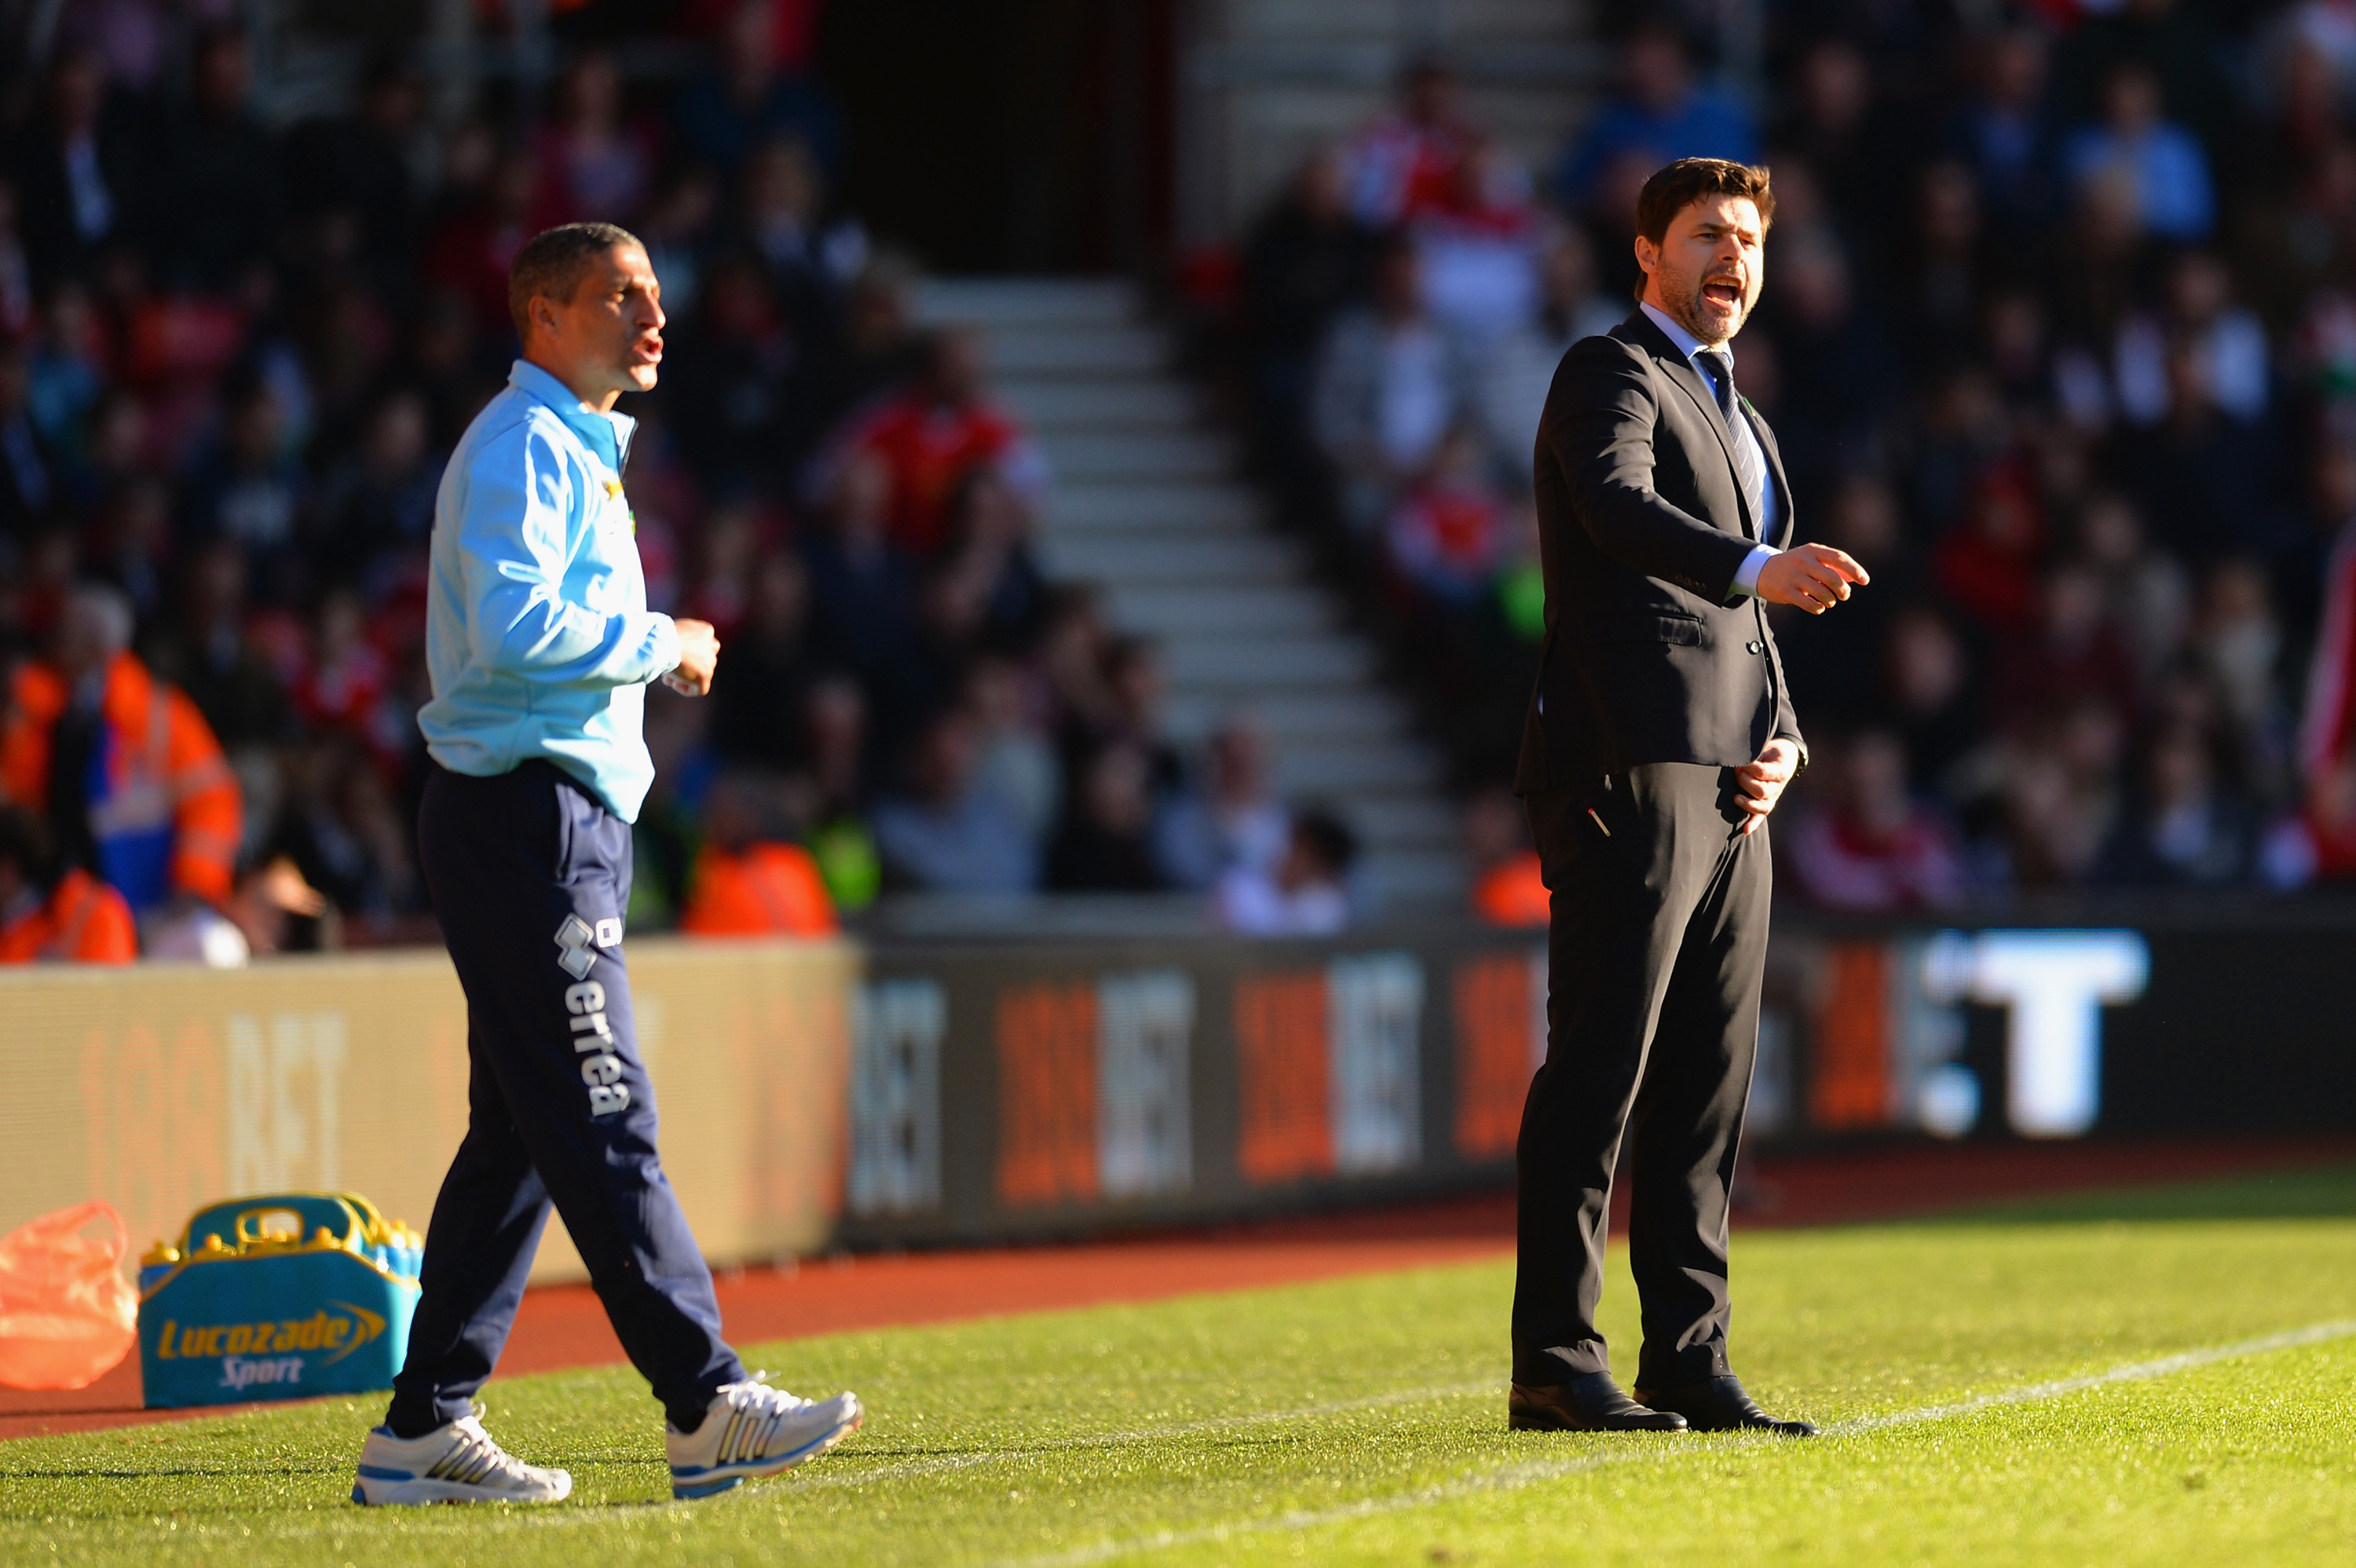 SOUTHAMPTON, ENGLAND - MARCH 15:  Chris Hughton manager of Norwich City and Manager Mauricio Pochettino of Southampton on the touchline during the Barclays Premier League match between Southampton and Norwich City at St Mary's Stadium on March 15, 2014 in Southampton, England.  (Photo by Christopher Lee/Getty Images)